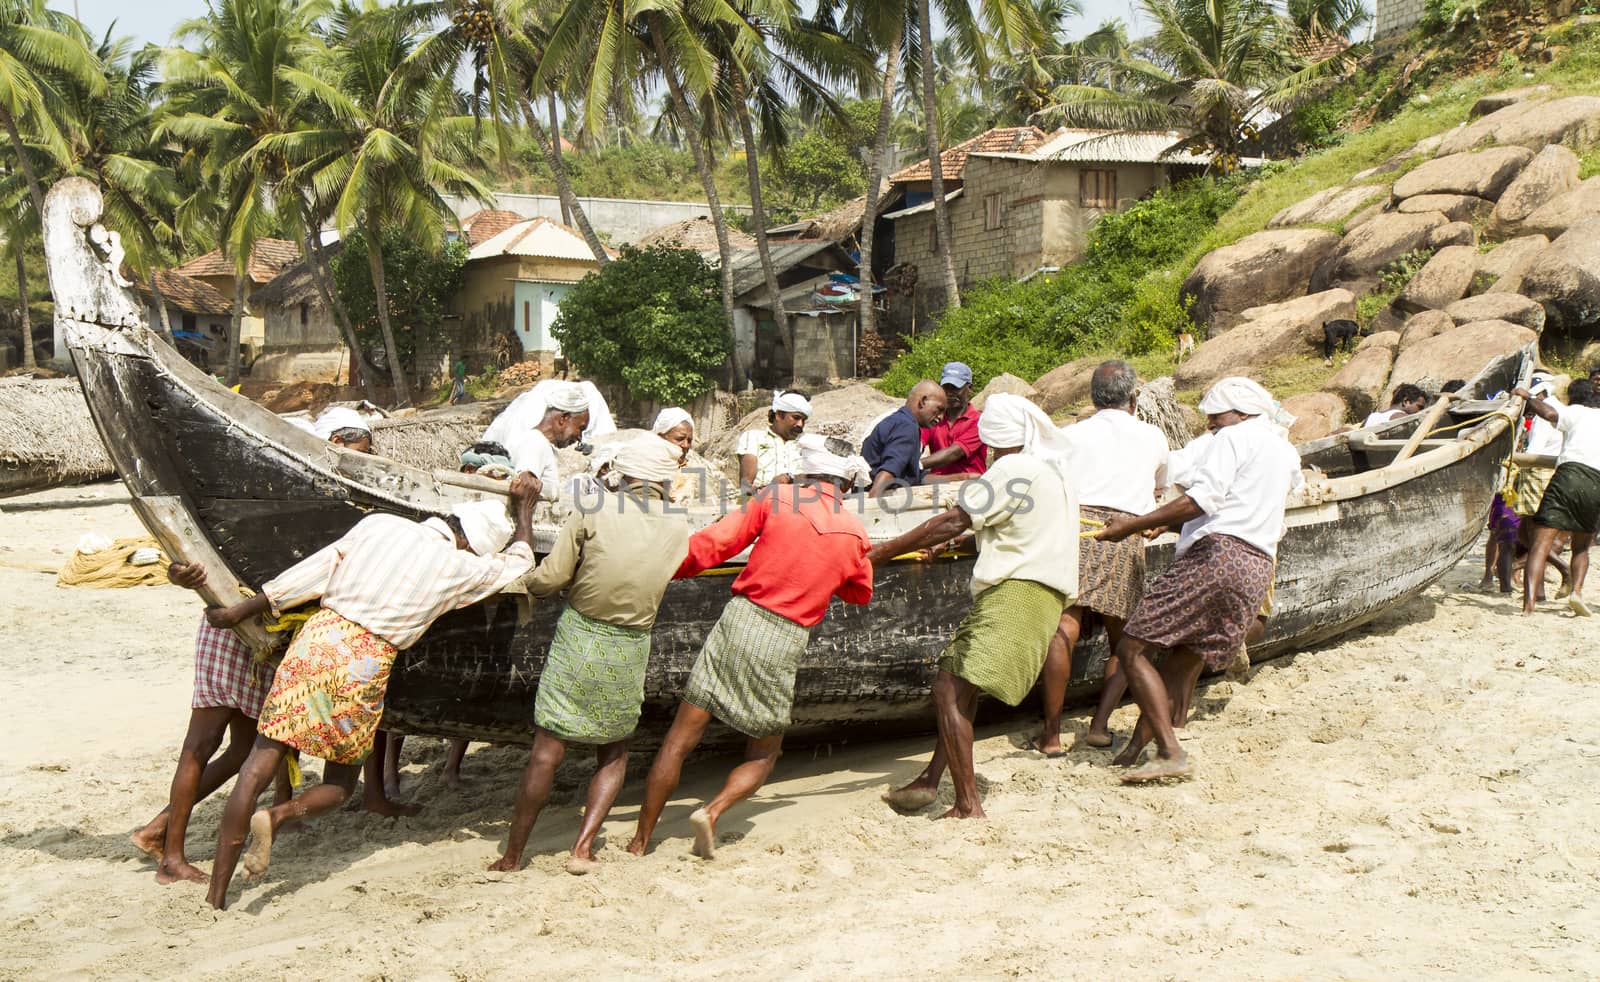 Fishermen pushing the fishing boat on the beach by straannick